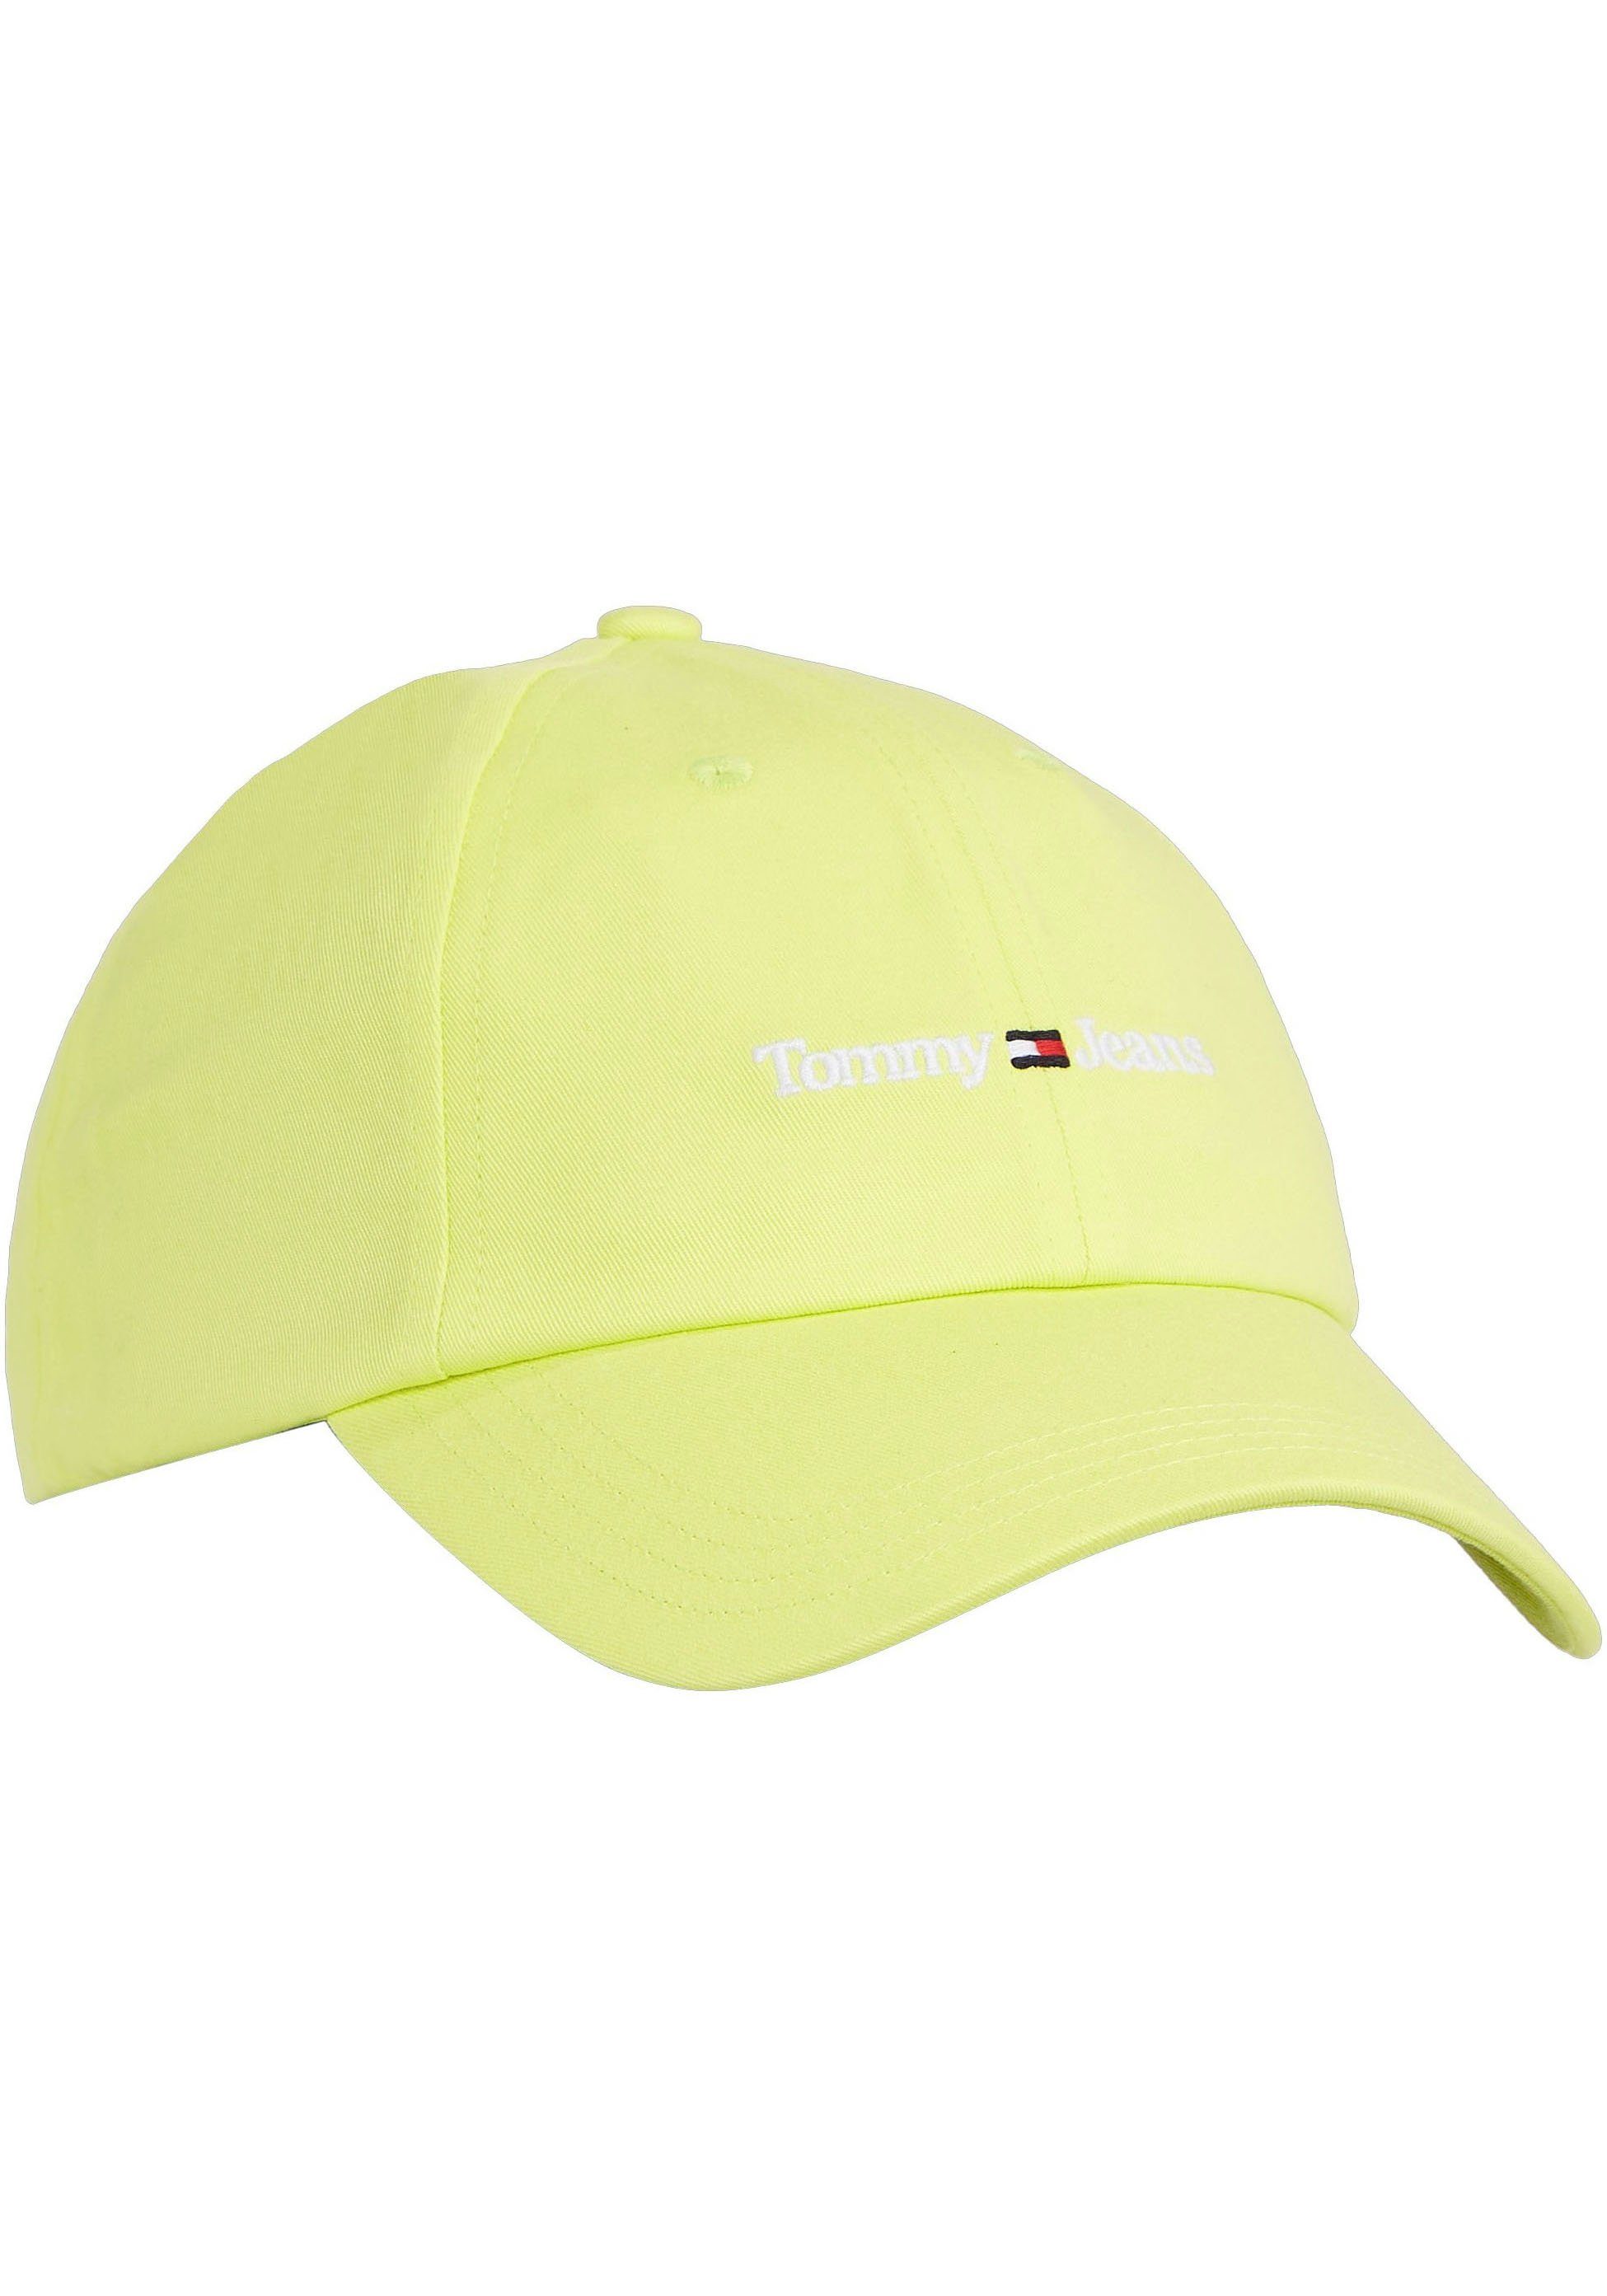 Tommy Jeans Baseball Cap mit Tommy Jeans Logostickerei limone